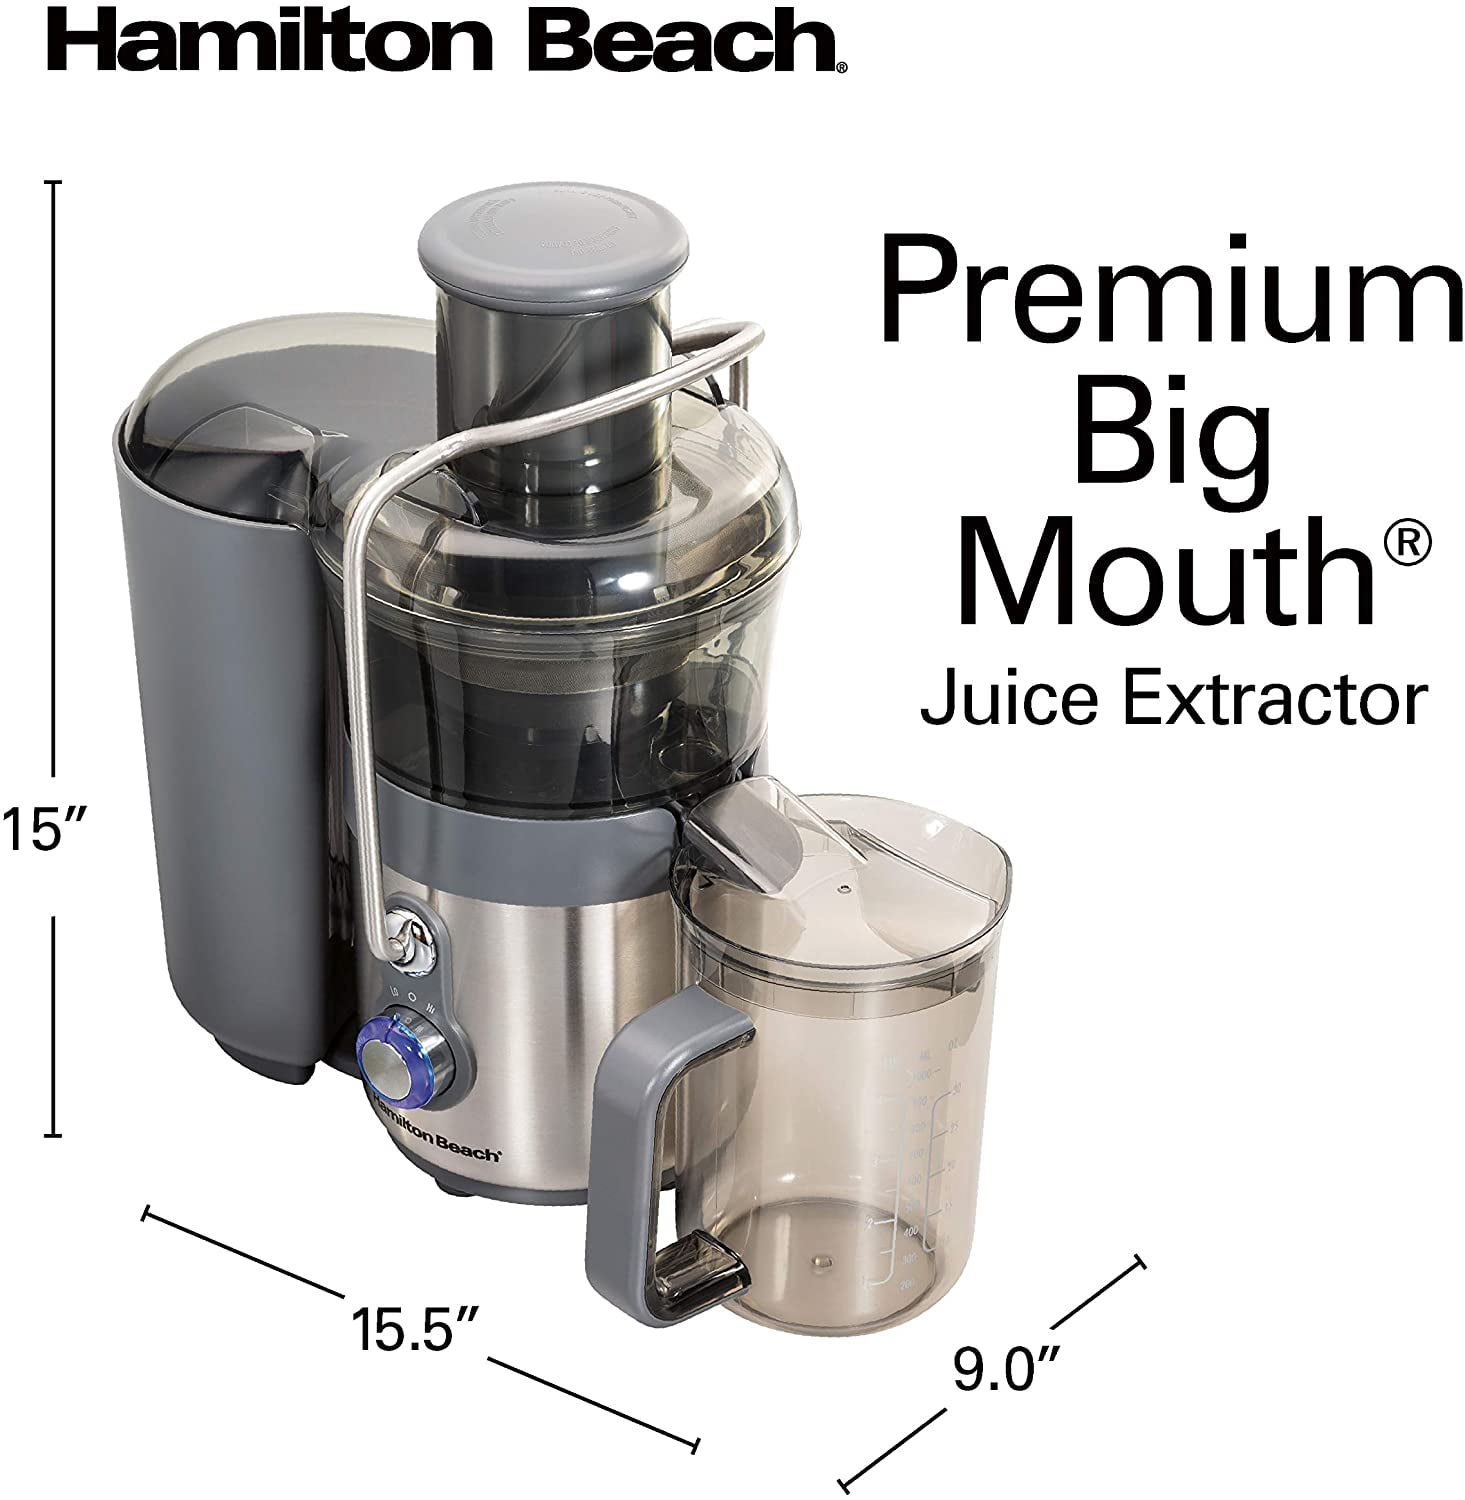 Pick up this best-selling Hamilton Beach juicer with an extra-large chute  for under $70